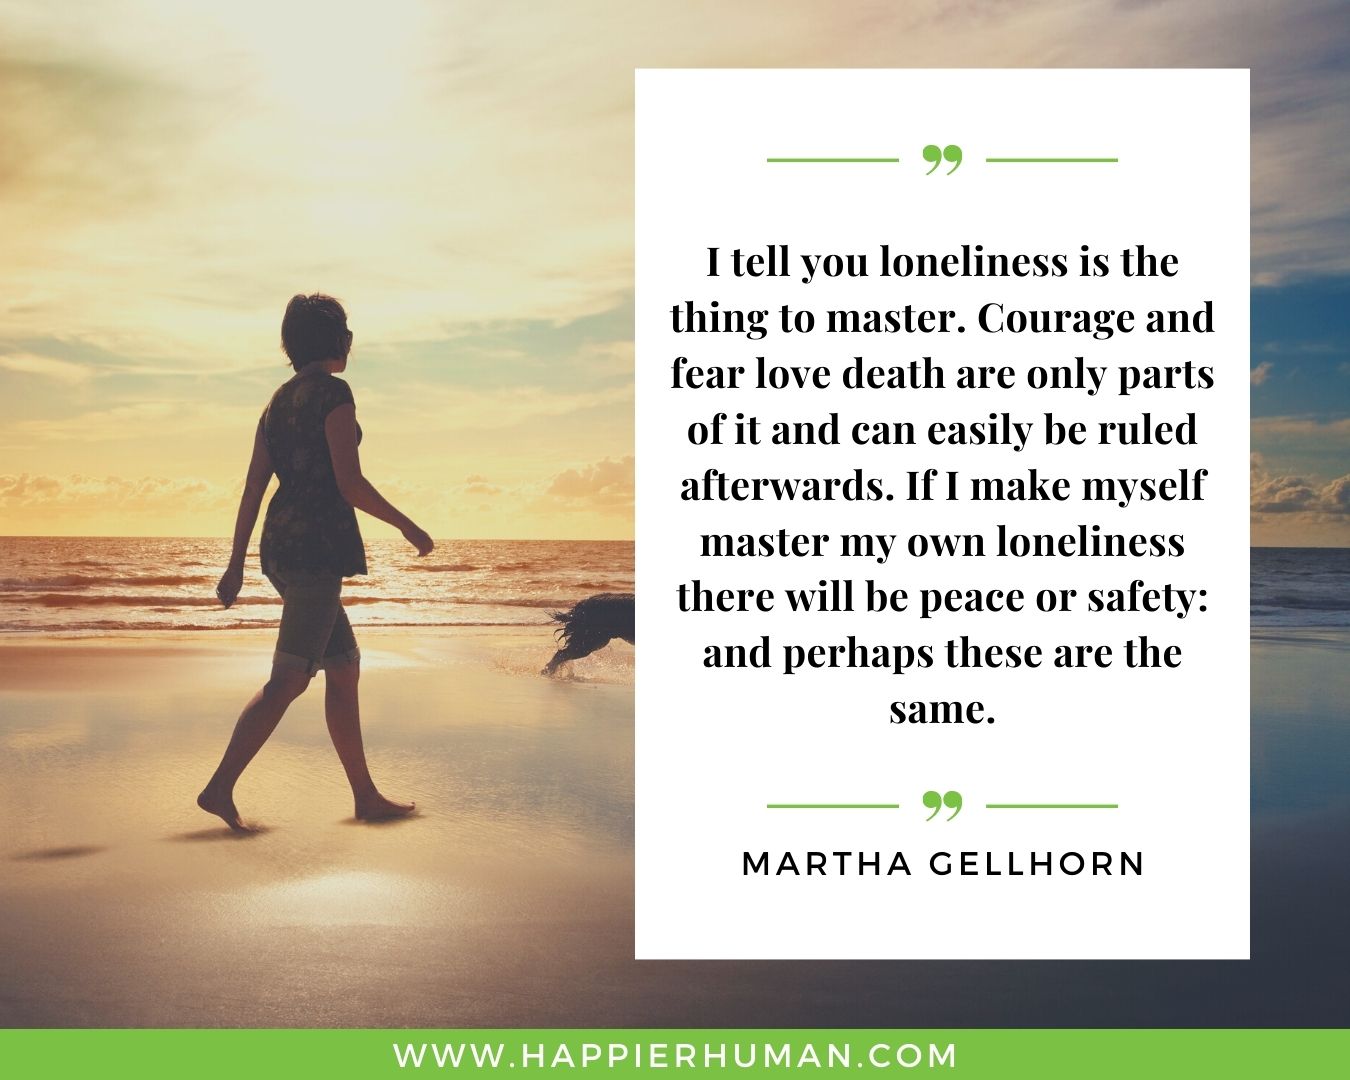 Loneliness Quotes - “I tell you loneliness is the thing to master. Courage and fear love death are only parts of it and can easily be ruled afterwards. If I make myself master my own loneliness there will be peace or safety: and perhaps these are the same.” – Martha Gellhorn